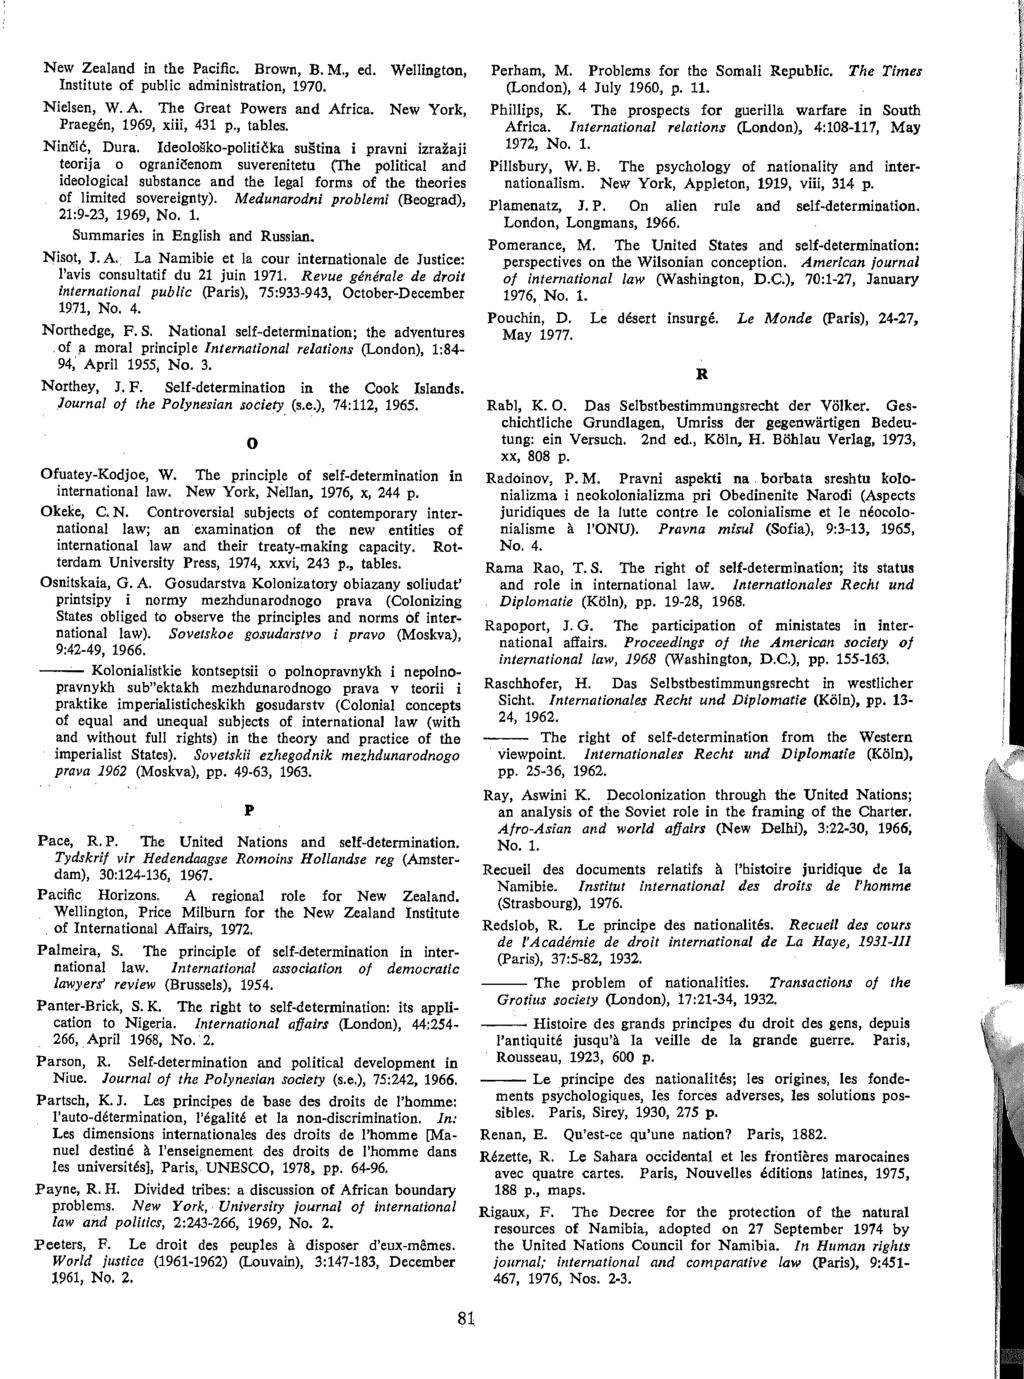 New Zealand in the Pacific. Brown, B. M., ed. Wellington, Institute of public administration, 1970. Nielsen, W. A. The Great Powers and Africa. New York, Praegen, 1969, xiii, 431 p., tables. Nin1!